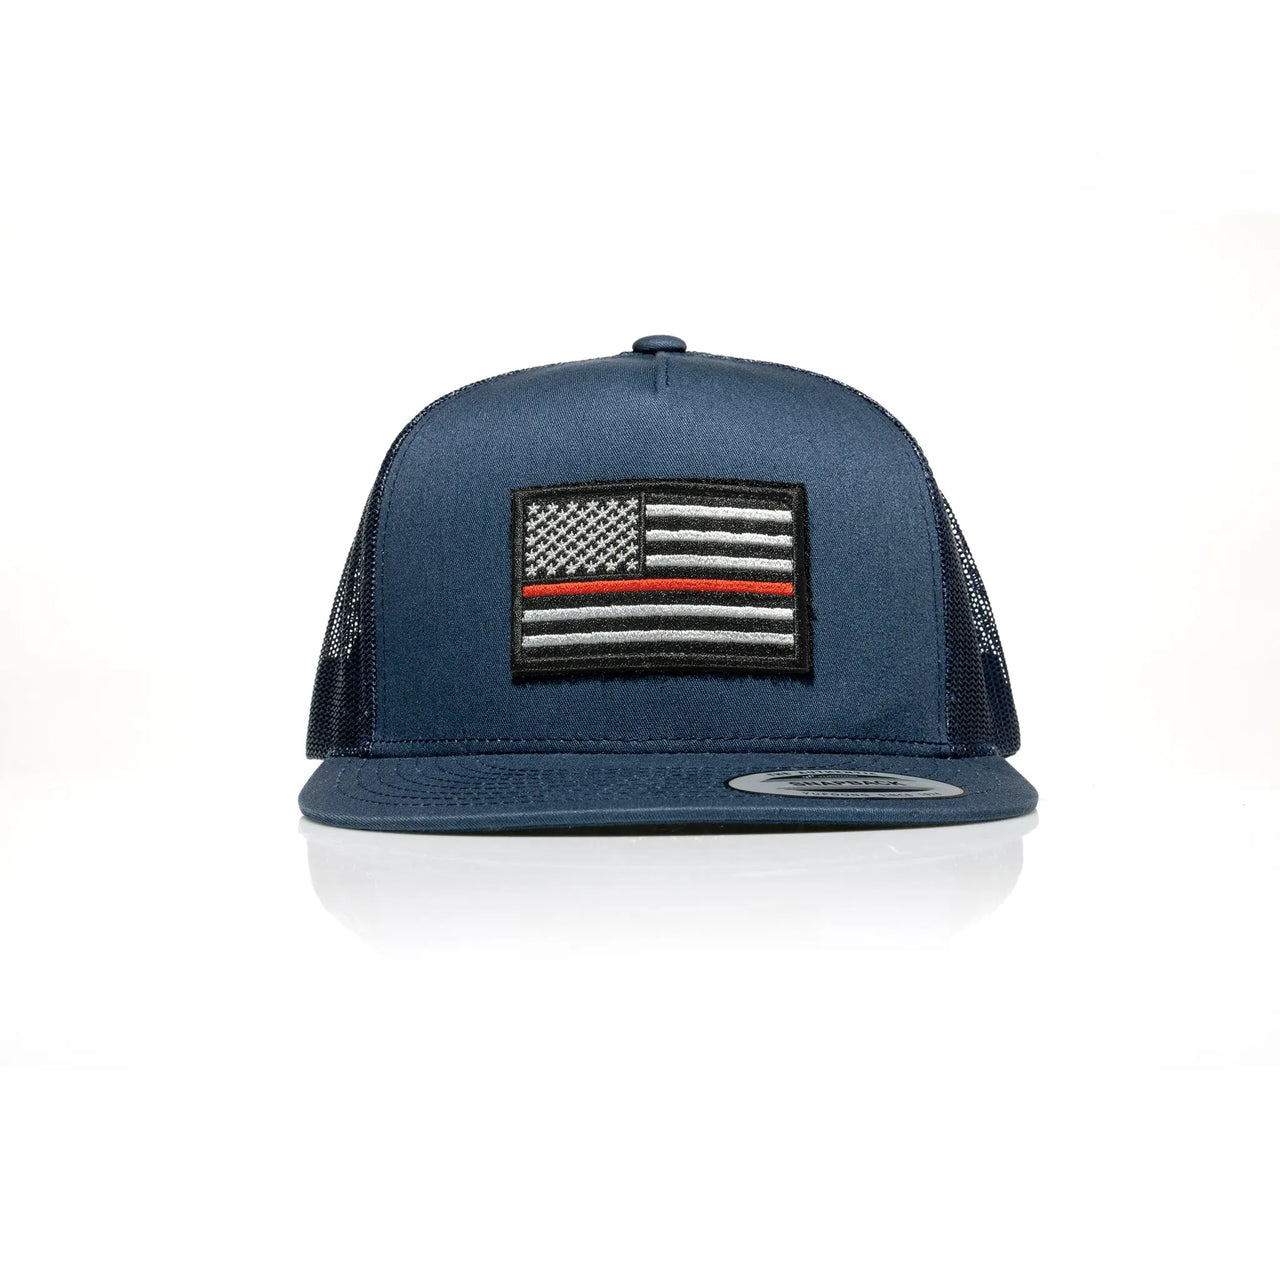 Thin Red Line Patch Trucker